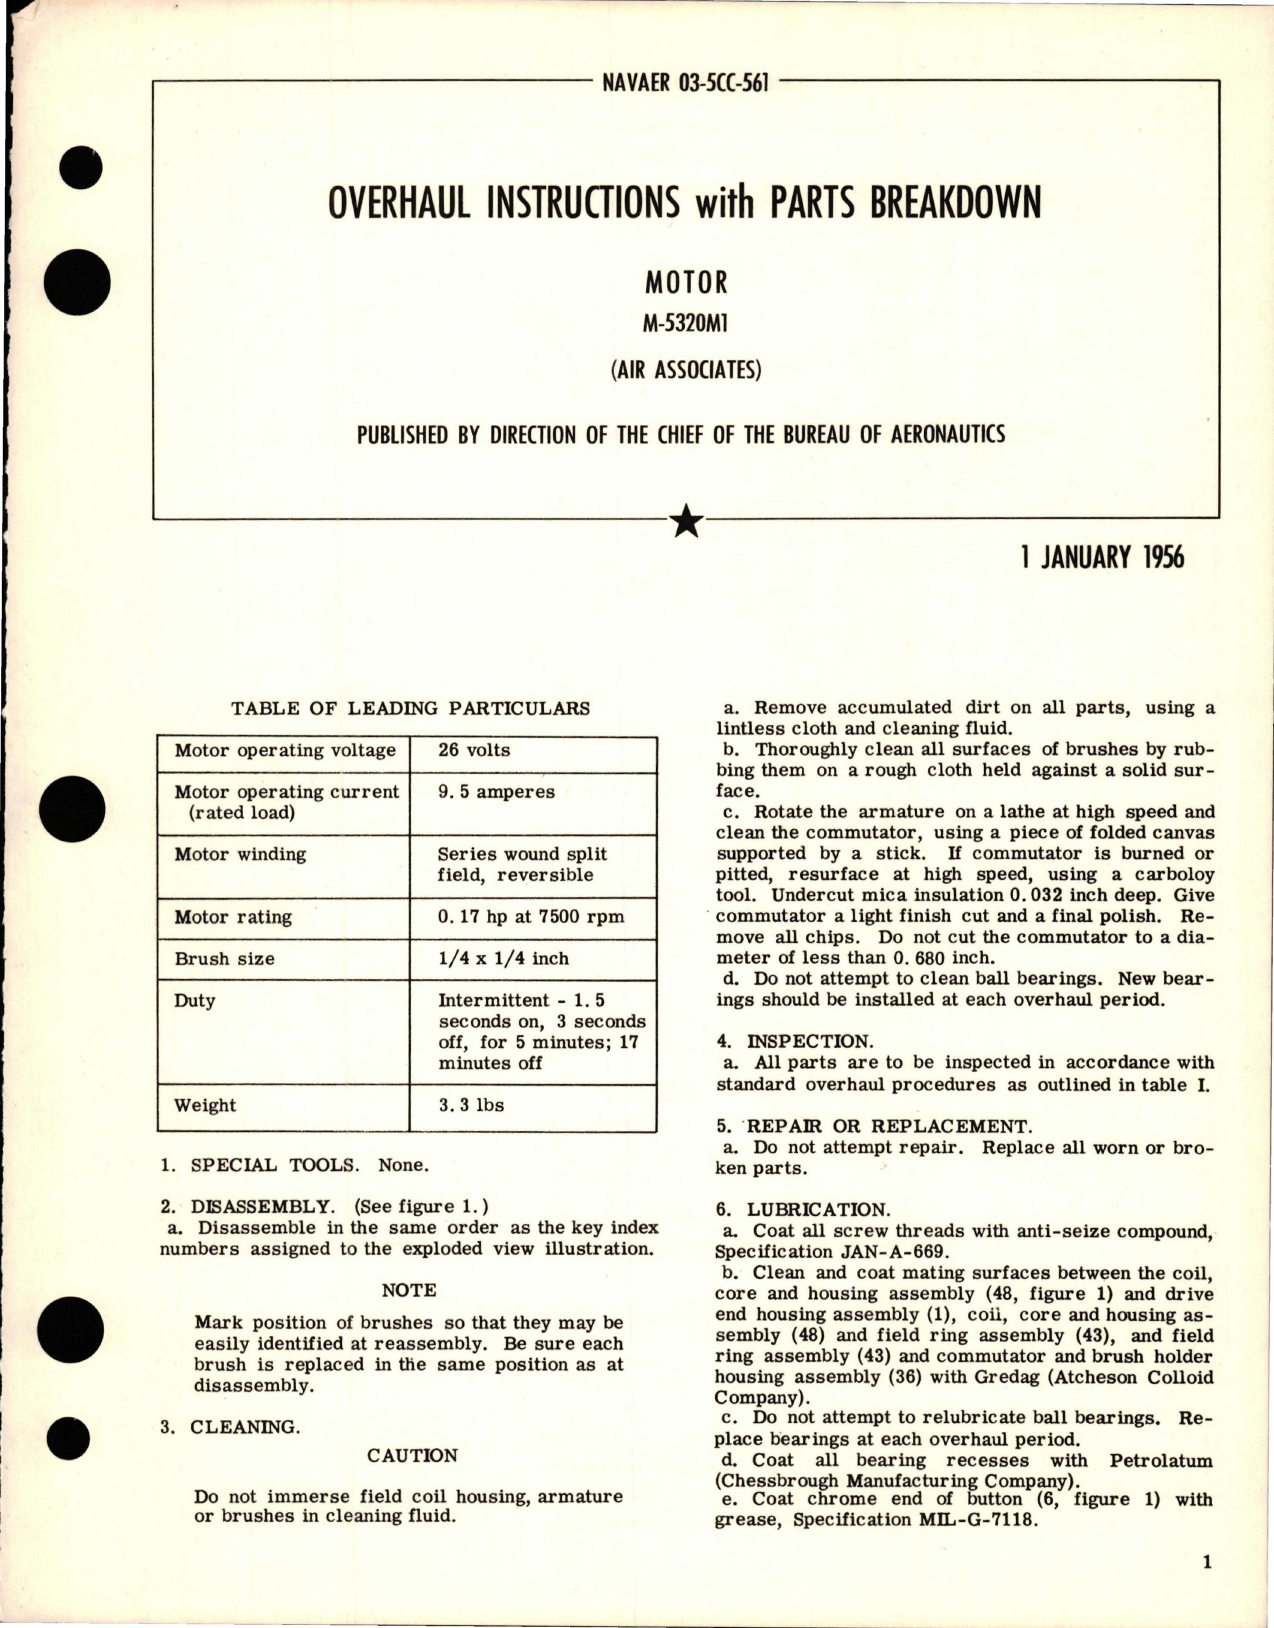 Sample page 1 from AirCorps Library document: Overhaul Instructions with Parts Breakdown for Motor - M-5320M1